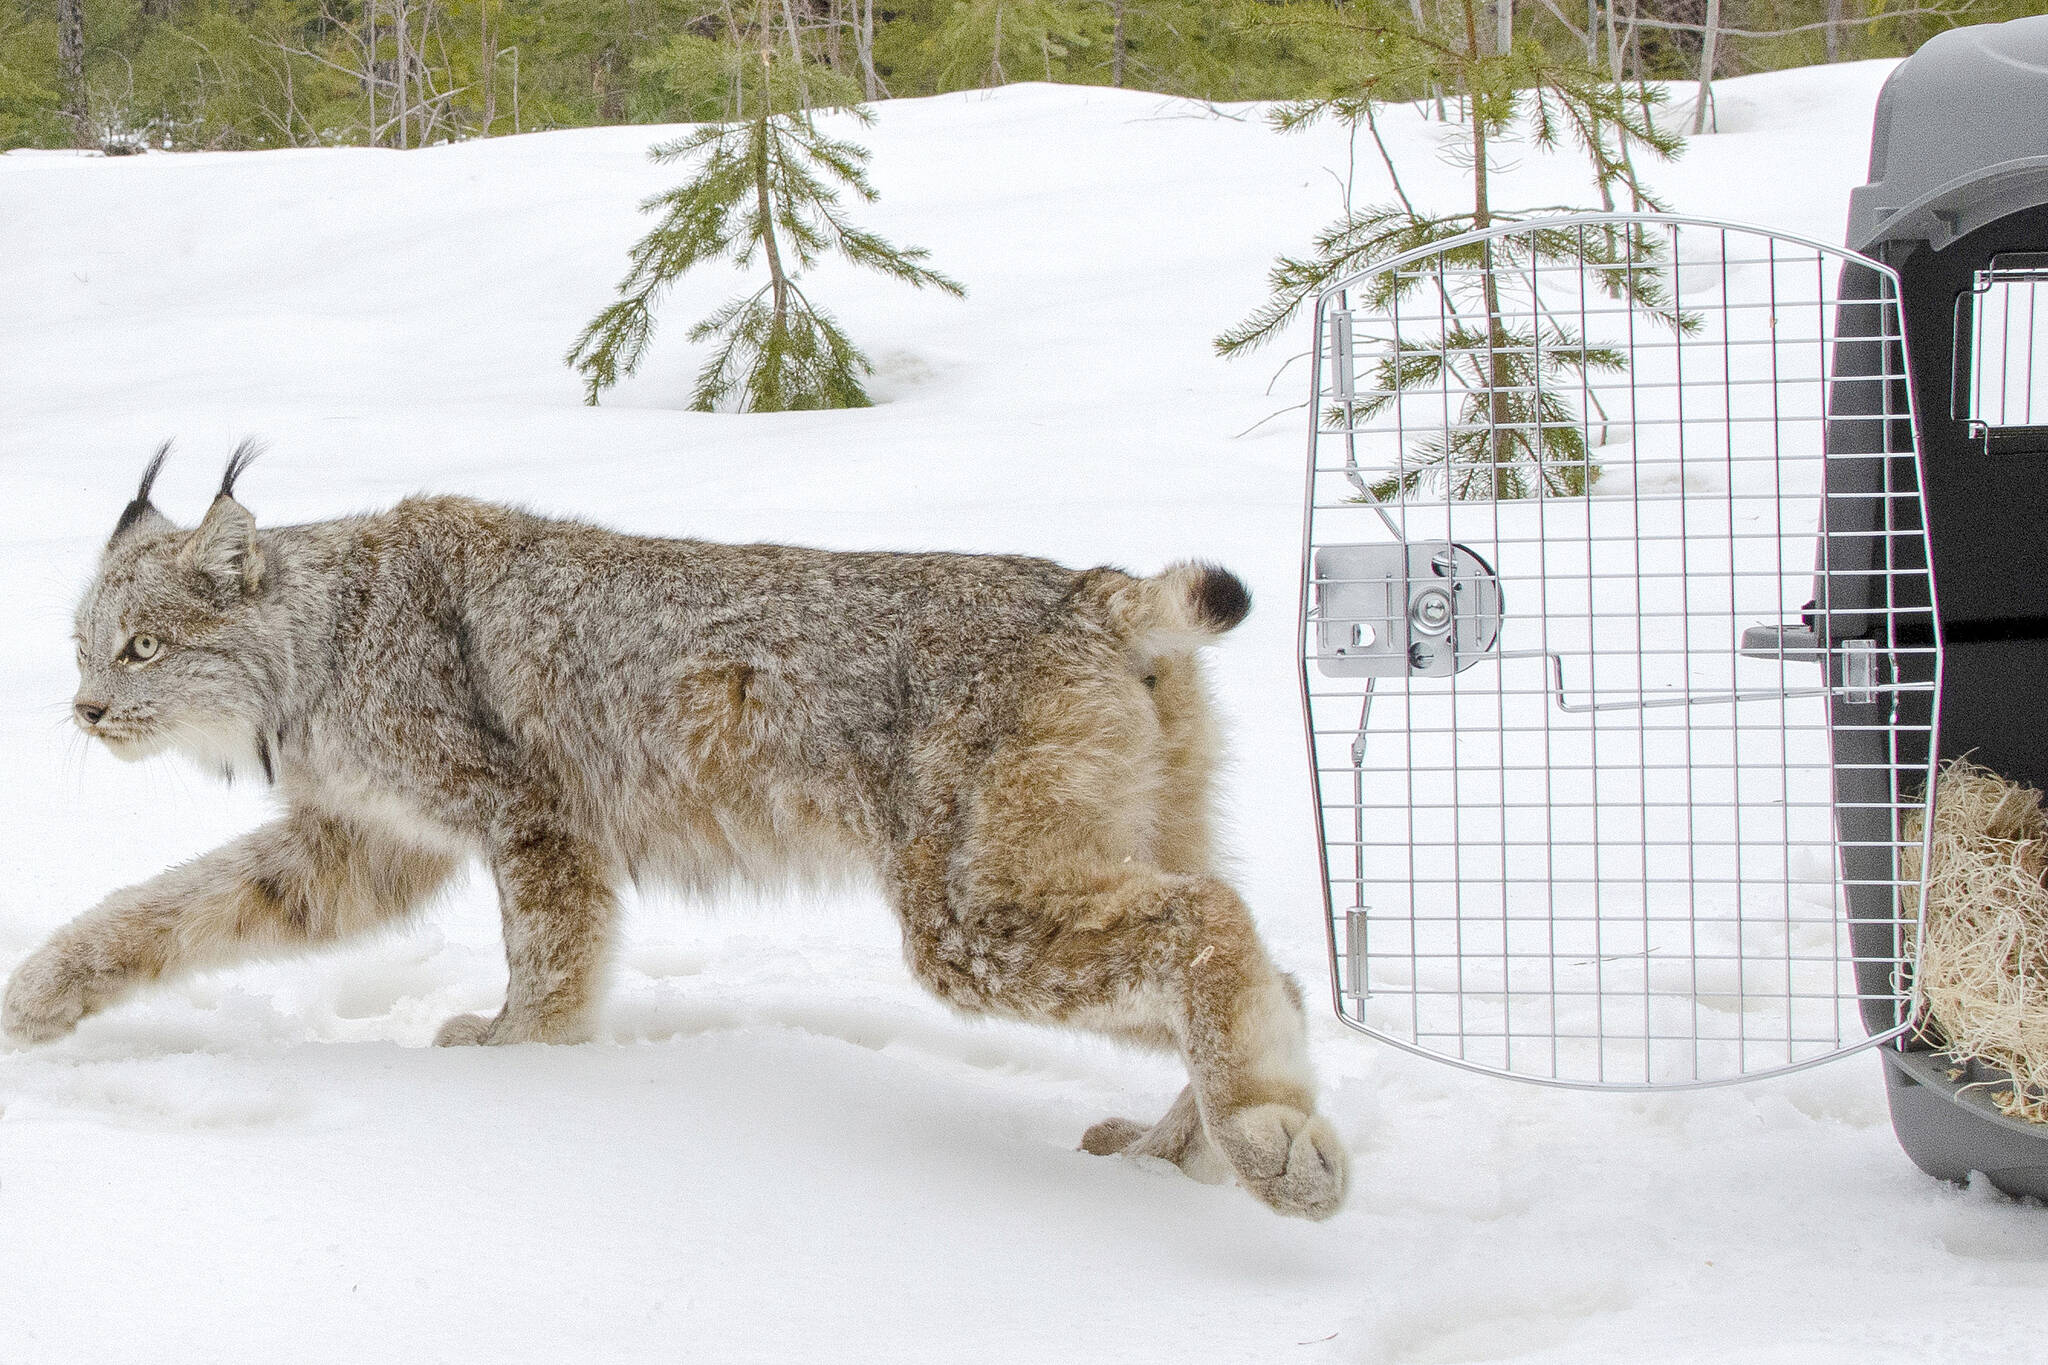 FILE - A Canada lynx is released in Schoolcraft County in Michigan's Upper Peninsula on April 12, 2019. U.S. wildlife officials have agreed to drop their attempt to strip Canada lynx of federal protections, under a court settlement approved Monday, Nov. 1, 2021, by a judge in Montana. (John Pepin/Michigan Department of Natural Resources via AP, File)